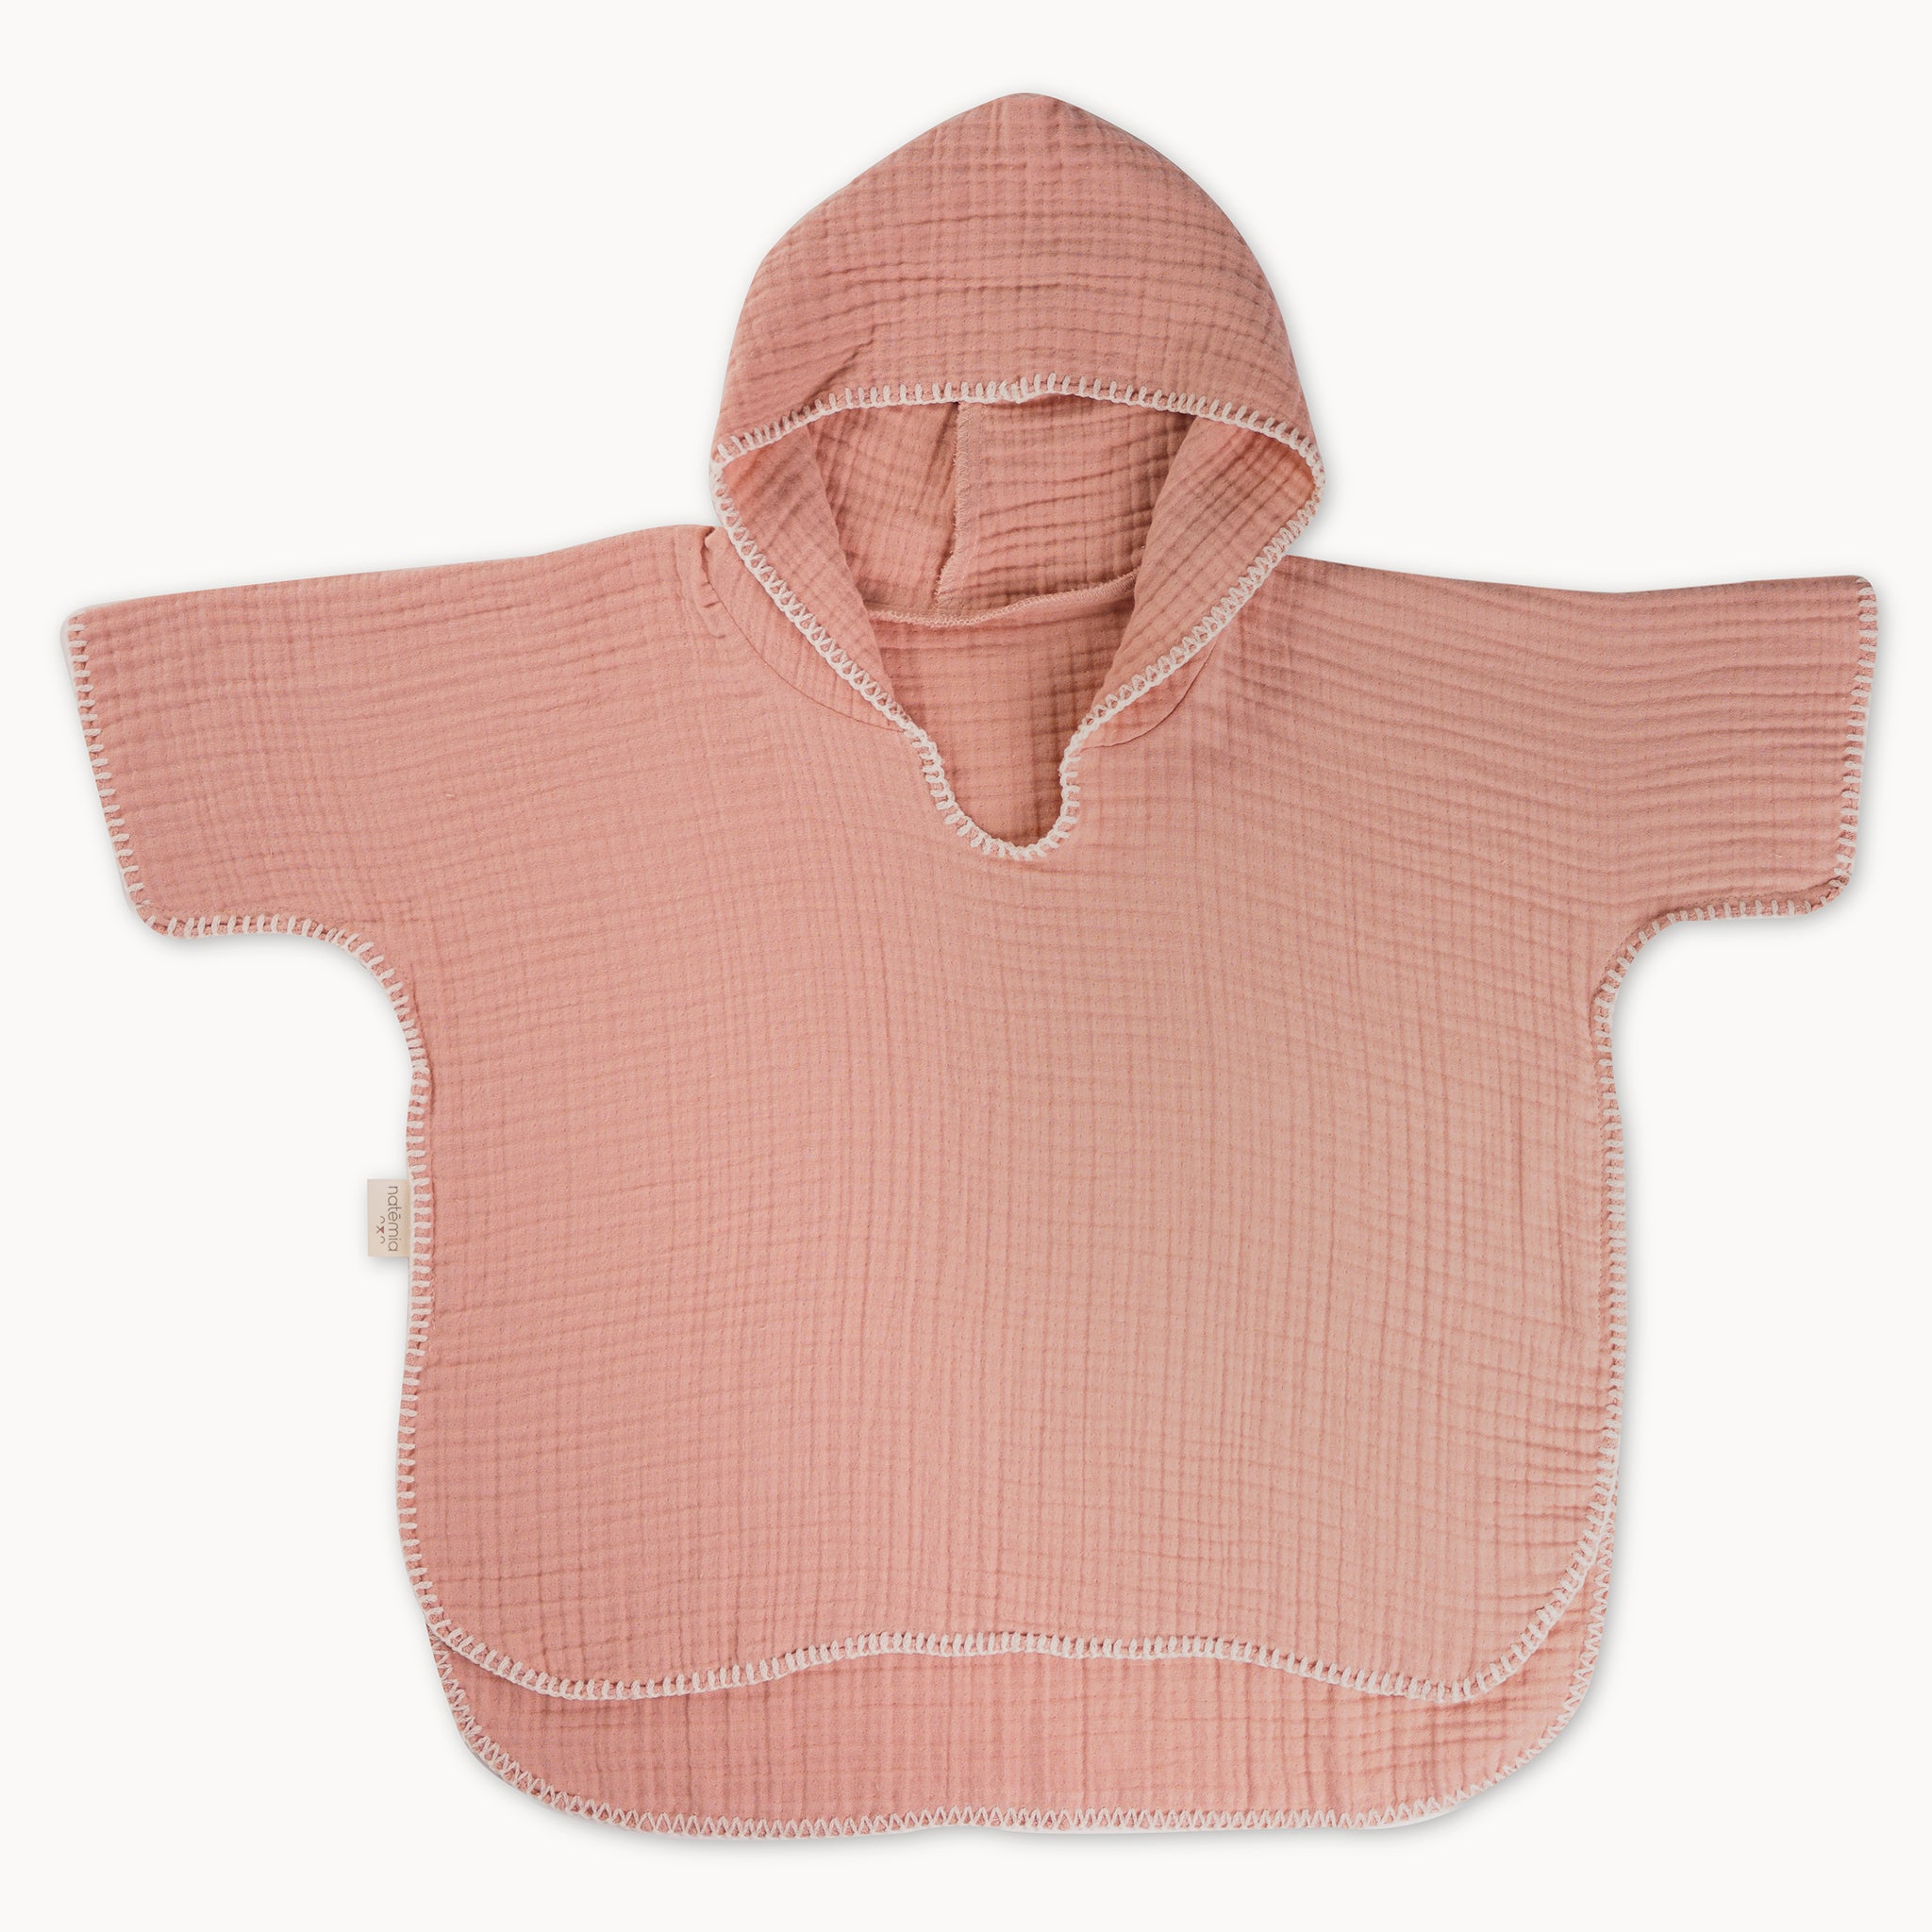 Organic Cotton Muslin Poncho Cover-up For Kids - Natemia